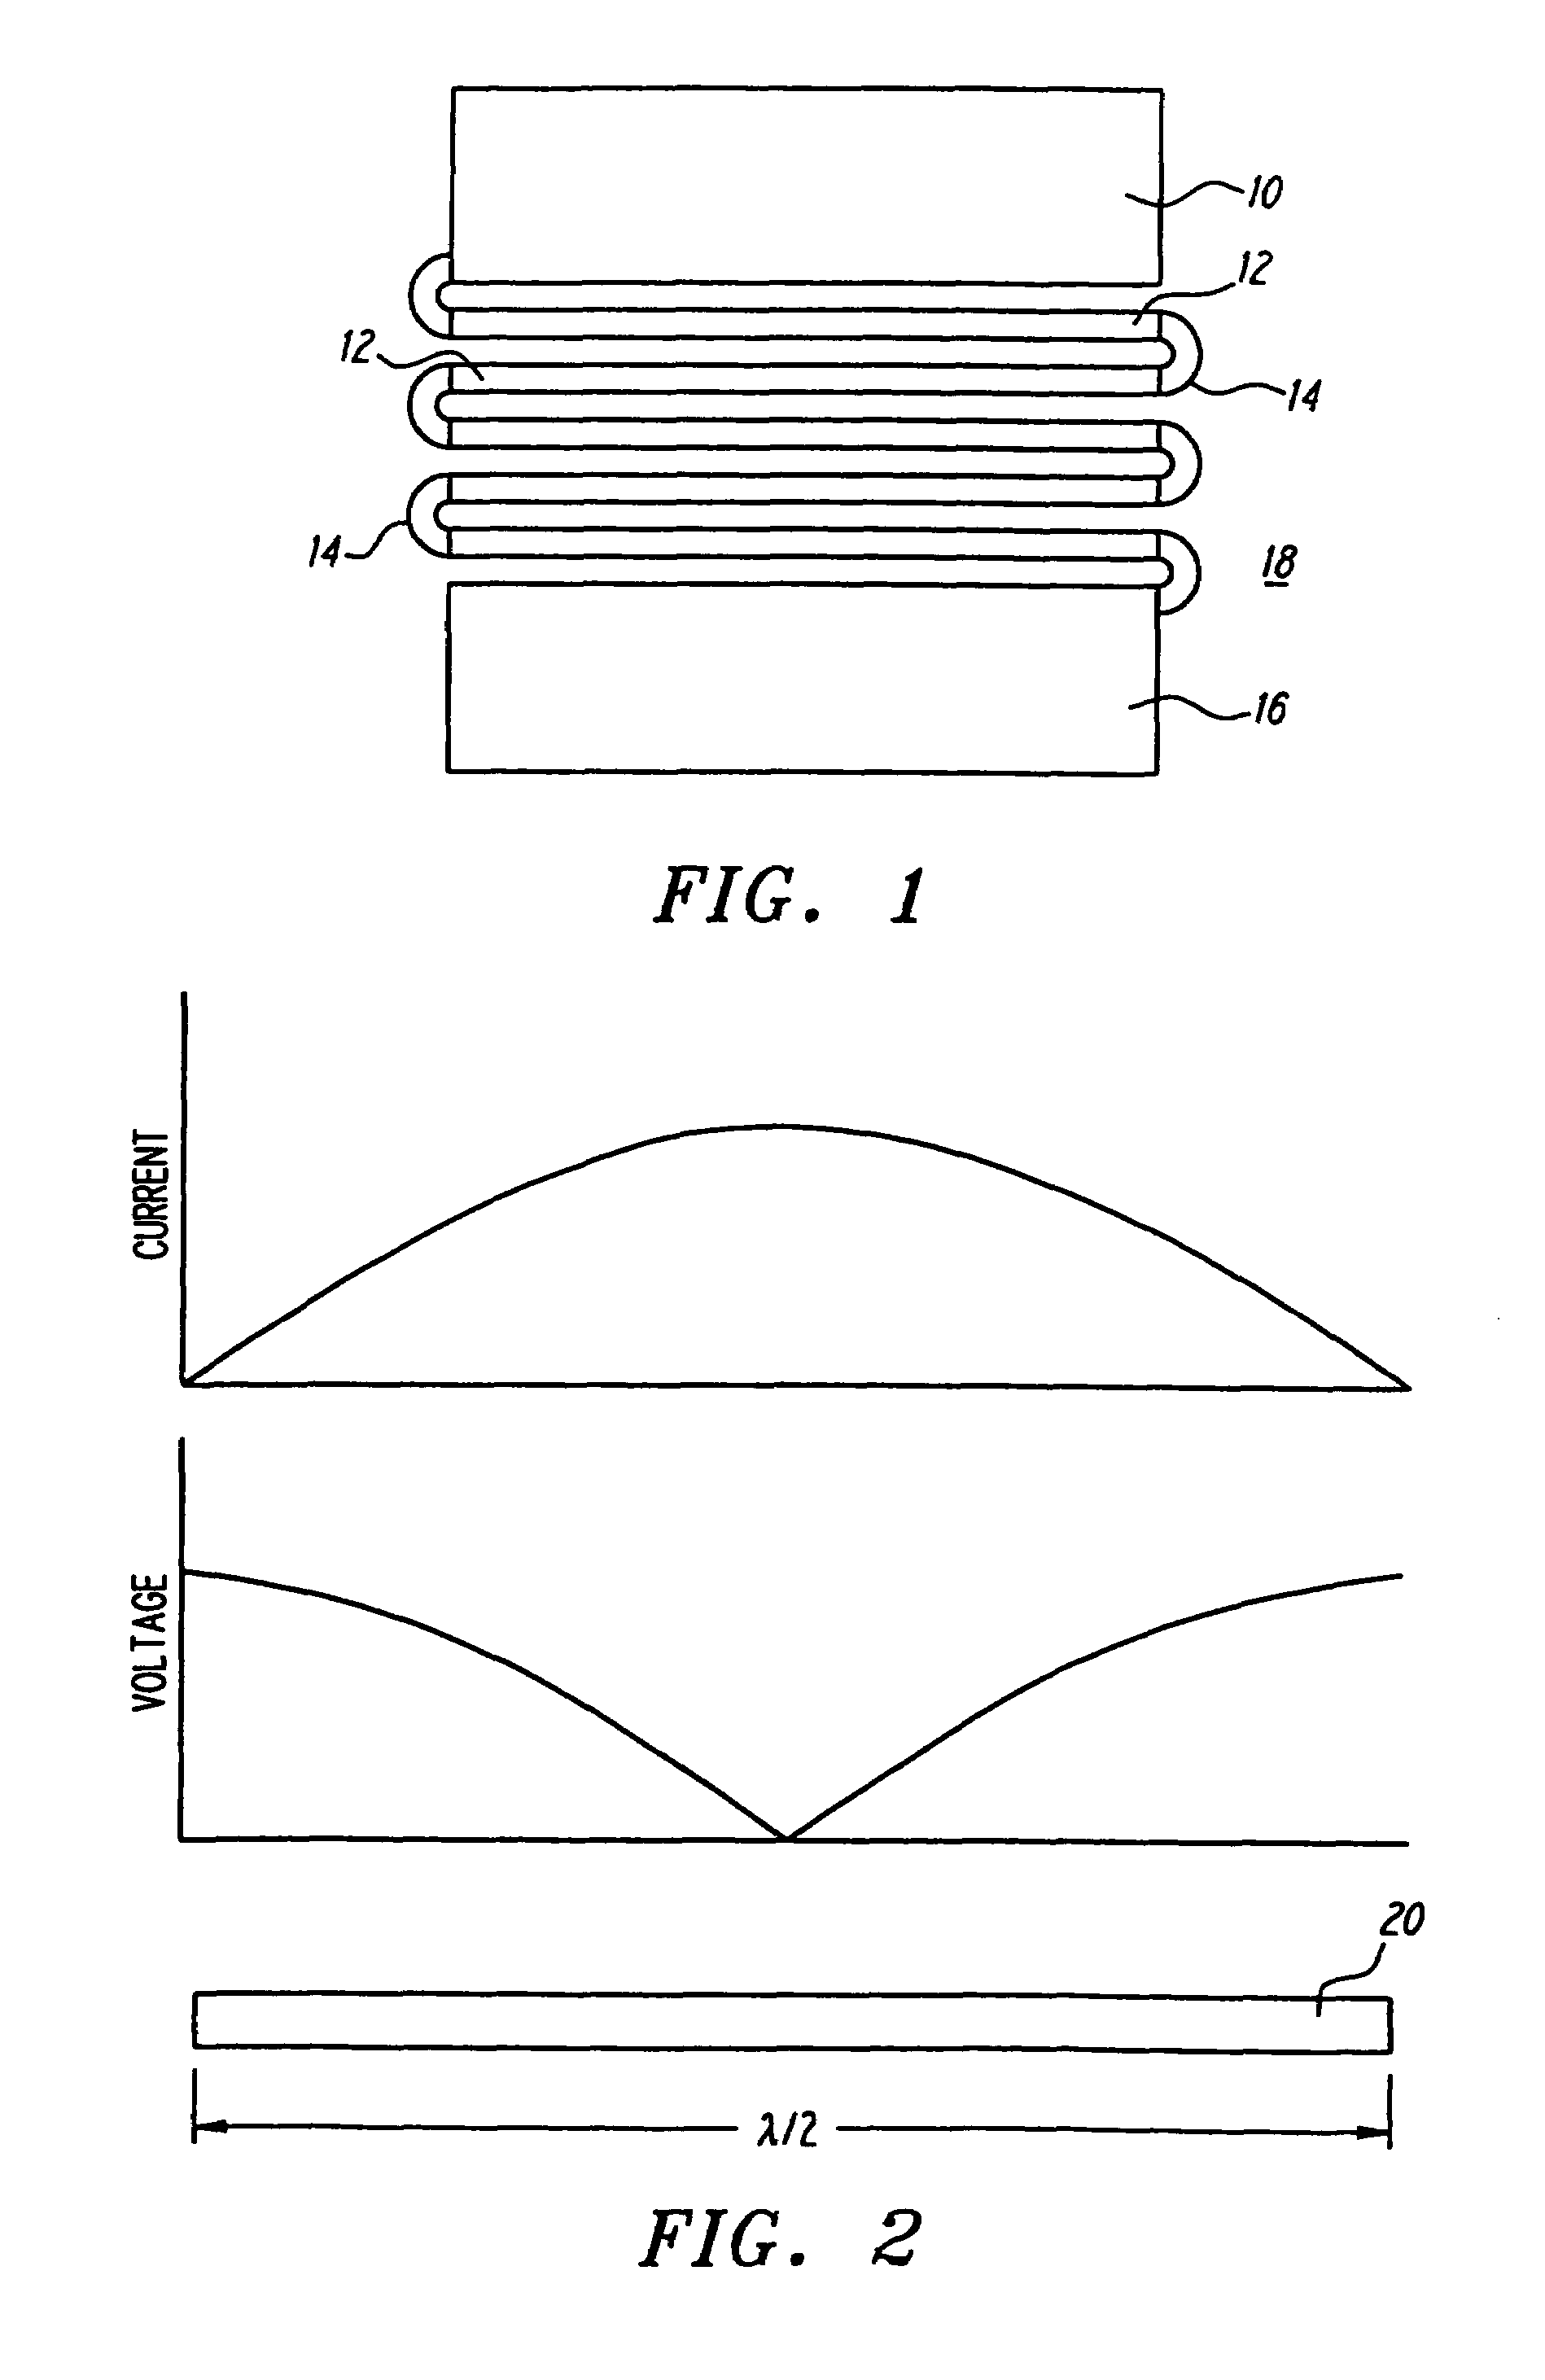 High temperature spiral snake superconducting resonator having wider runs with higher current density